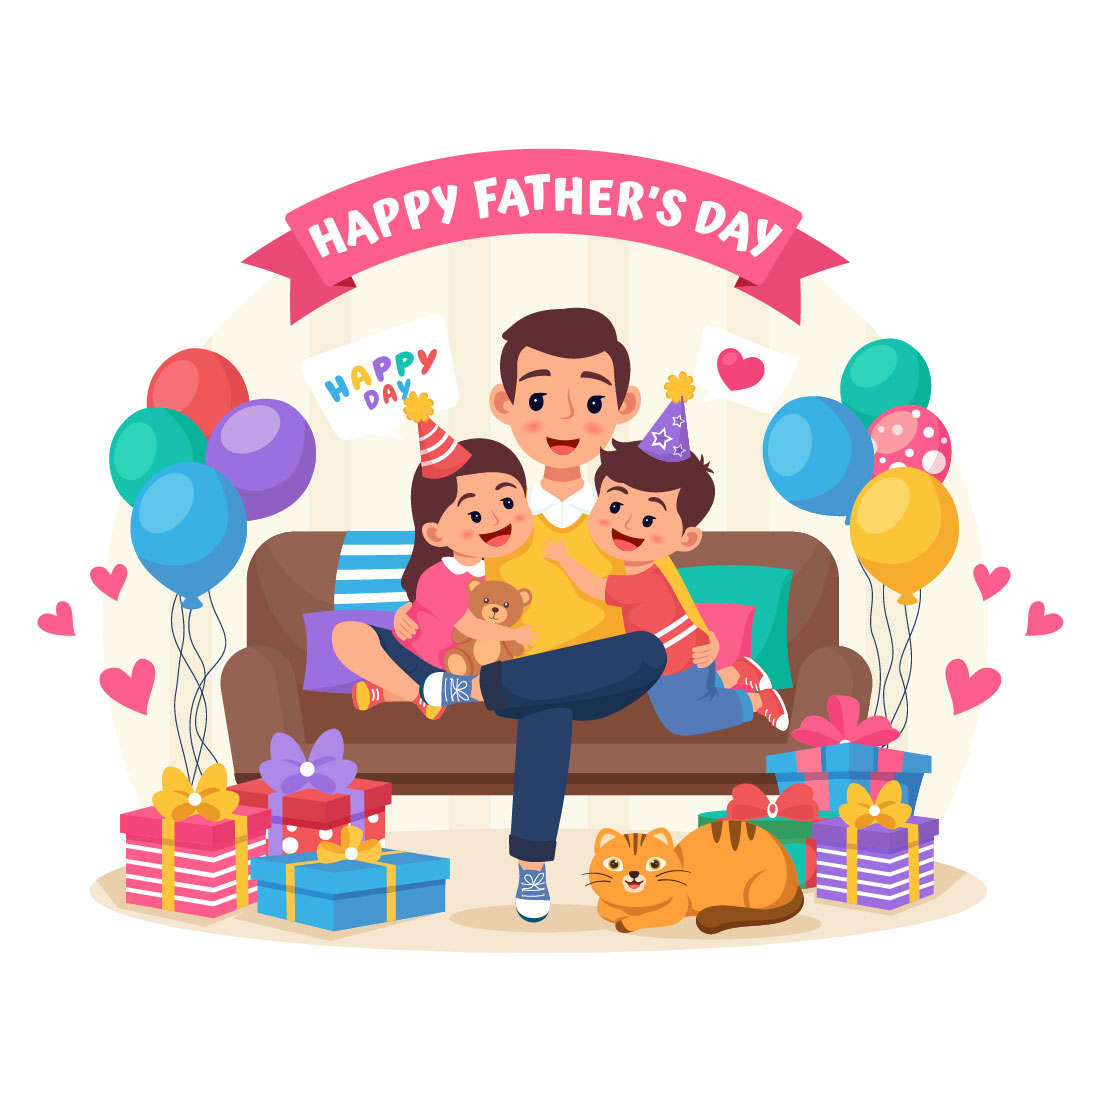 12 Happy Fathers Day Illustration cover image.